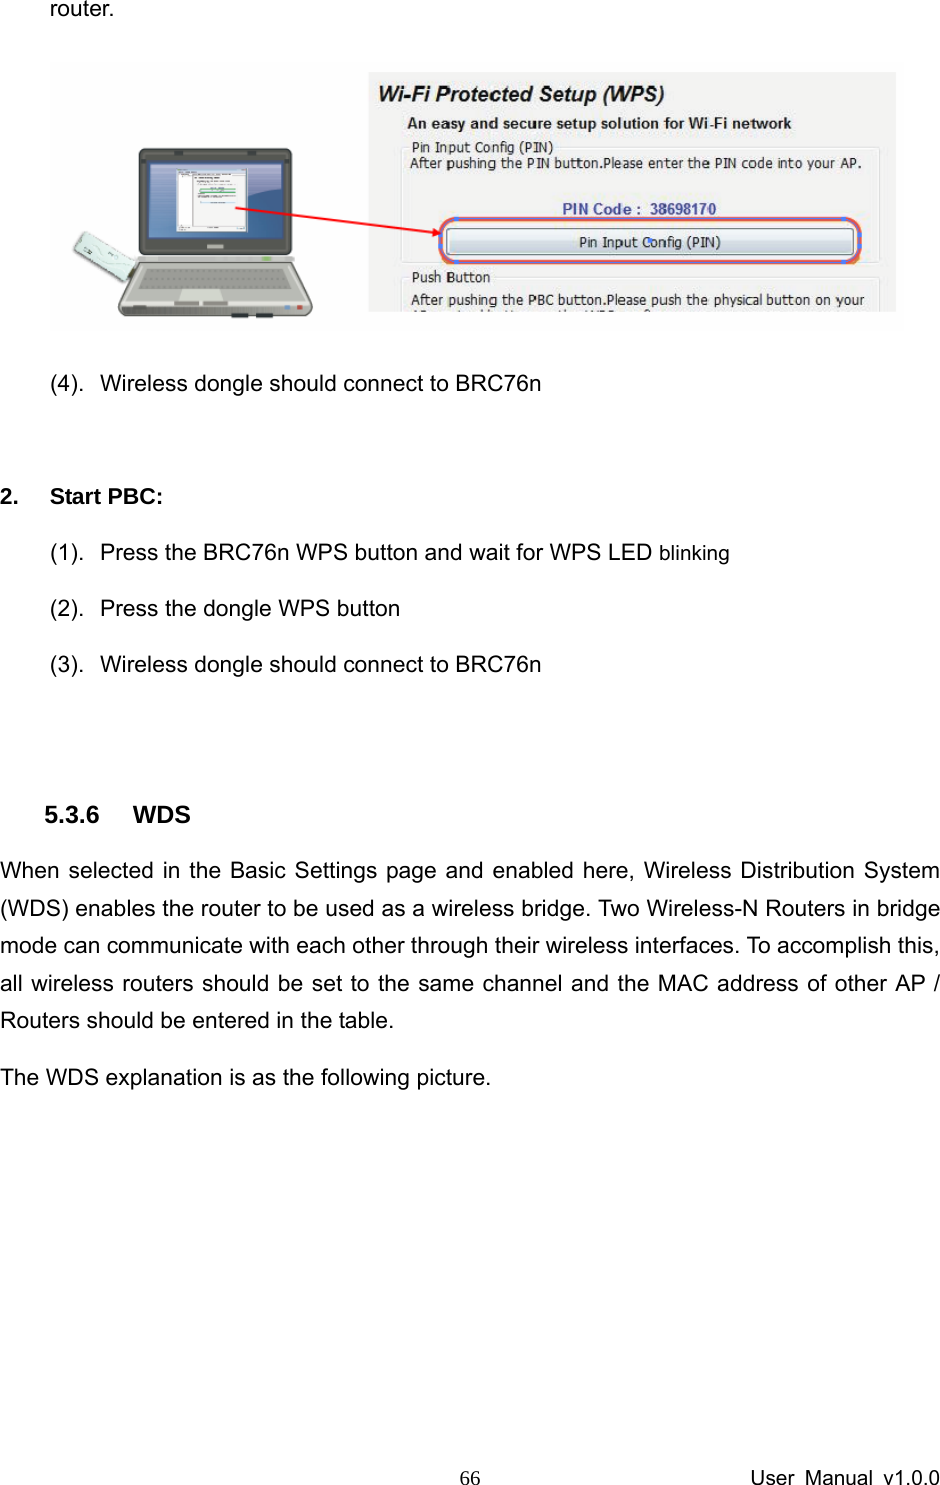                 User Manual v1.0.0 66router.  (4).  Wireless dongle should connect to BRC76n  2. Start PBC: (1).  Press the BRC76n WPS button and wait for WPS LED blinking (2).  Press the dongle WPS button (3).  Wireless dongle should connect to BRC76n  5.3.6 WDS When selected in the Basic Settings page and enabled here, Wireless Distribution System (WDS) enables the router to be used as a wireless bridge. Two Wireless-N Routers in bridge mode can communicate with each other through their wireless interfaces. To accomplish this, all wireless routers should be set to the same channel and the MAC address of other AP / Routers should be entered in the table.   The WDS explanation is as the following picture.    